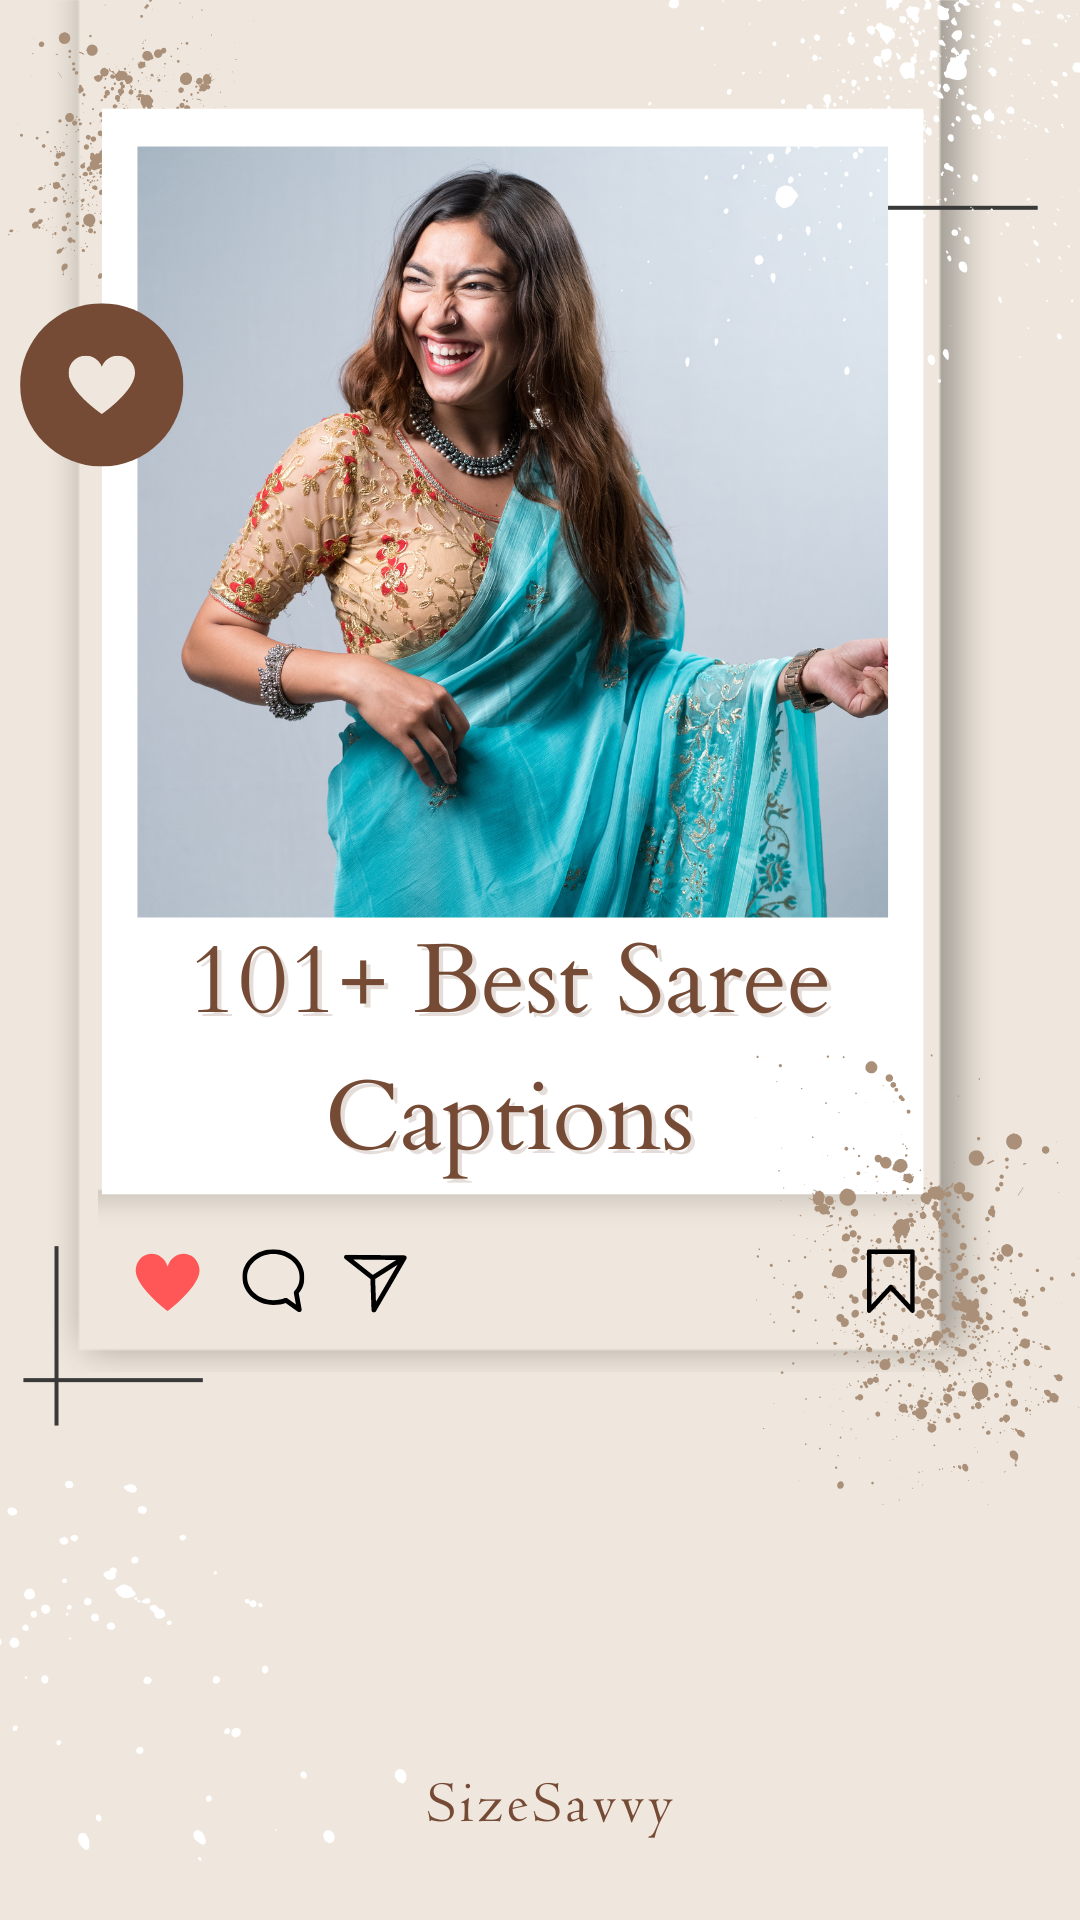 saree hashtags for instagram Archives - Shayari On Images